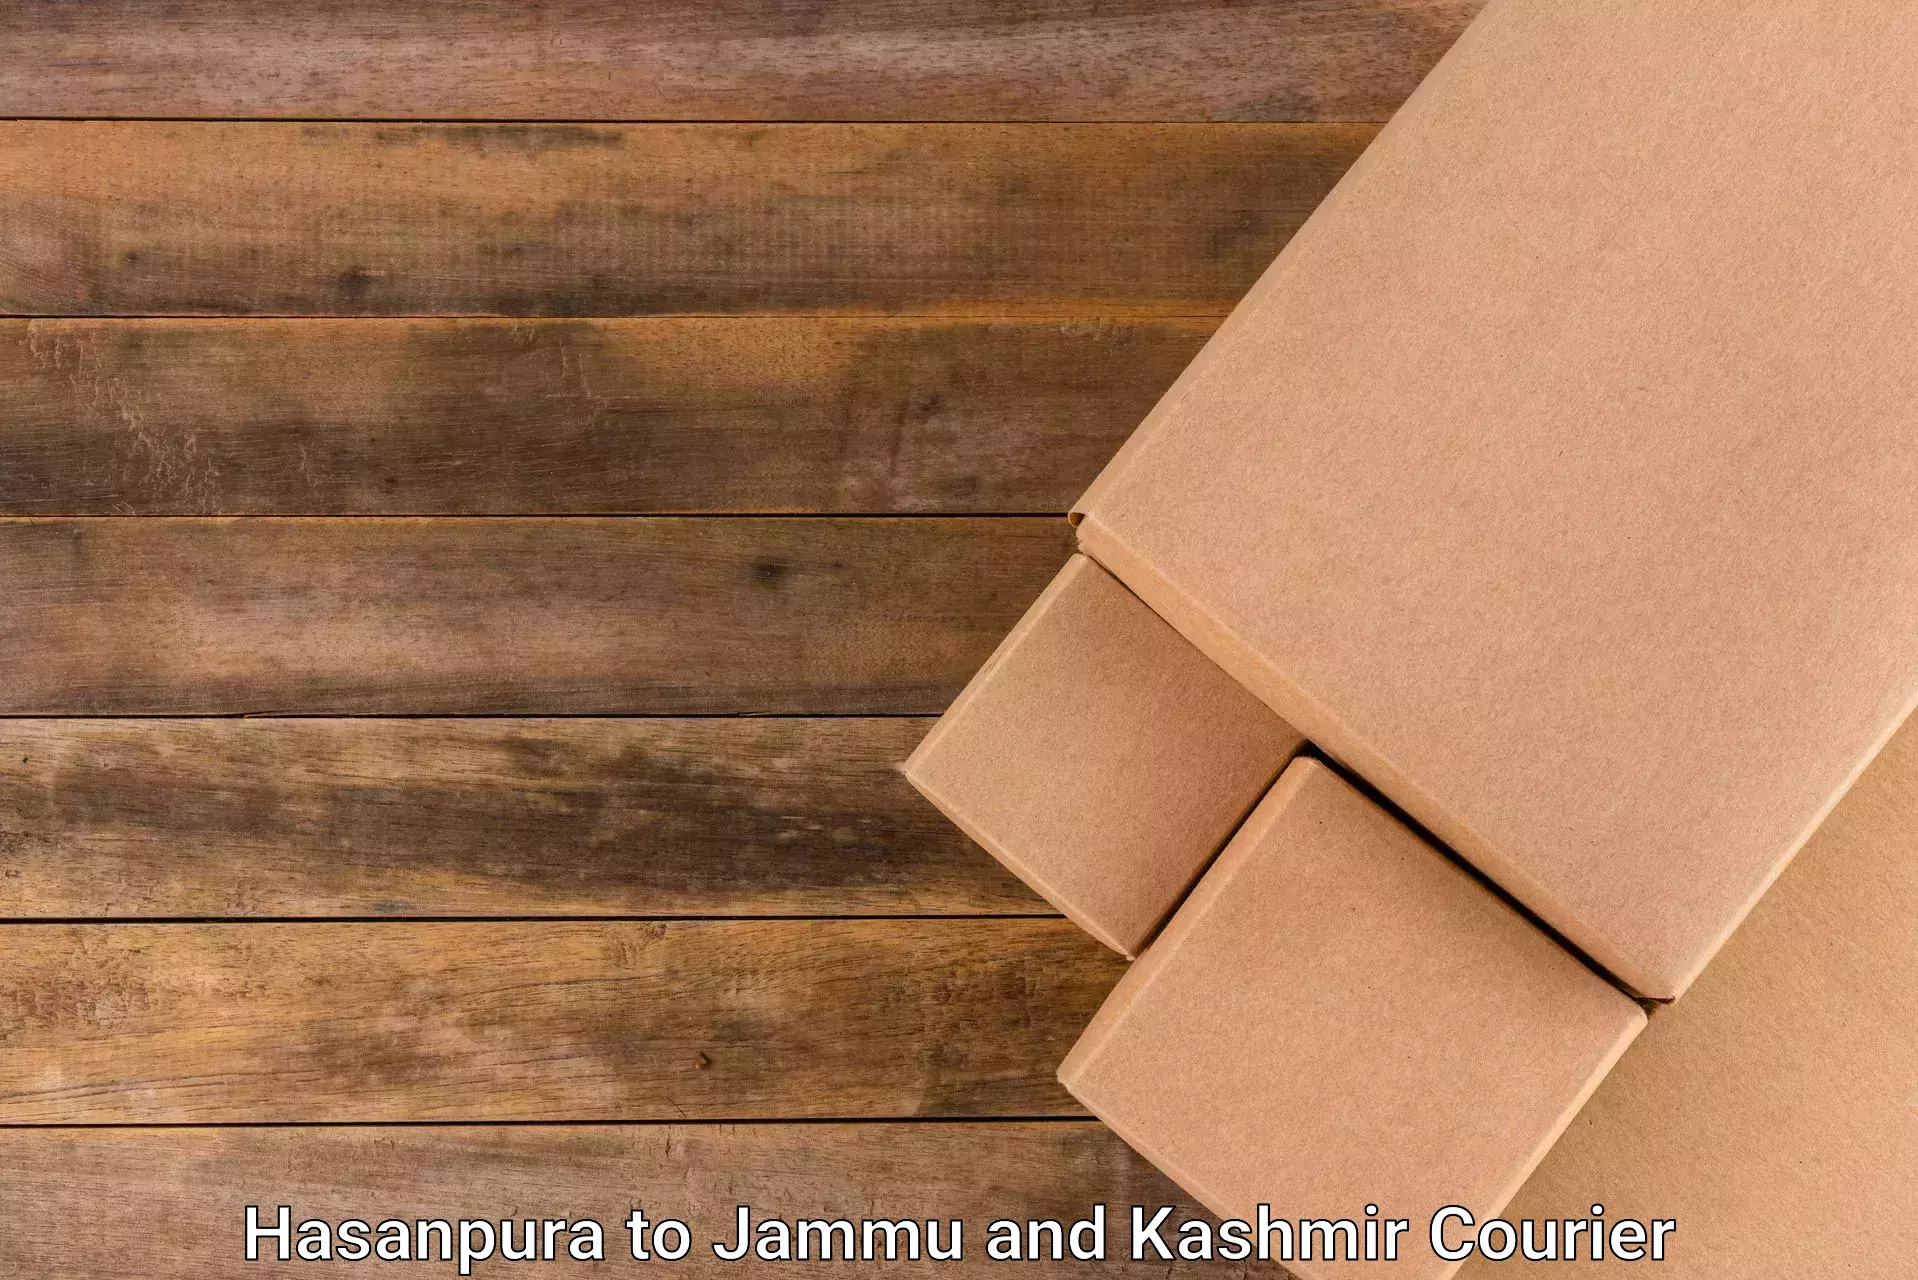 Flexible delivery schedules Hasanpura to Baramulla